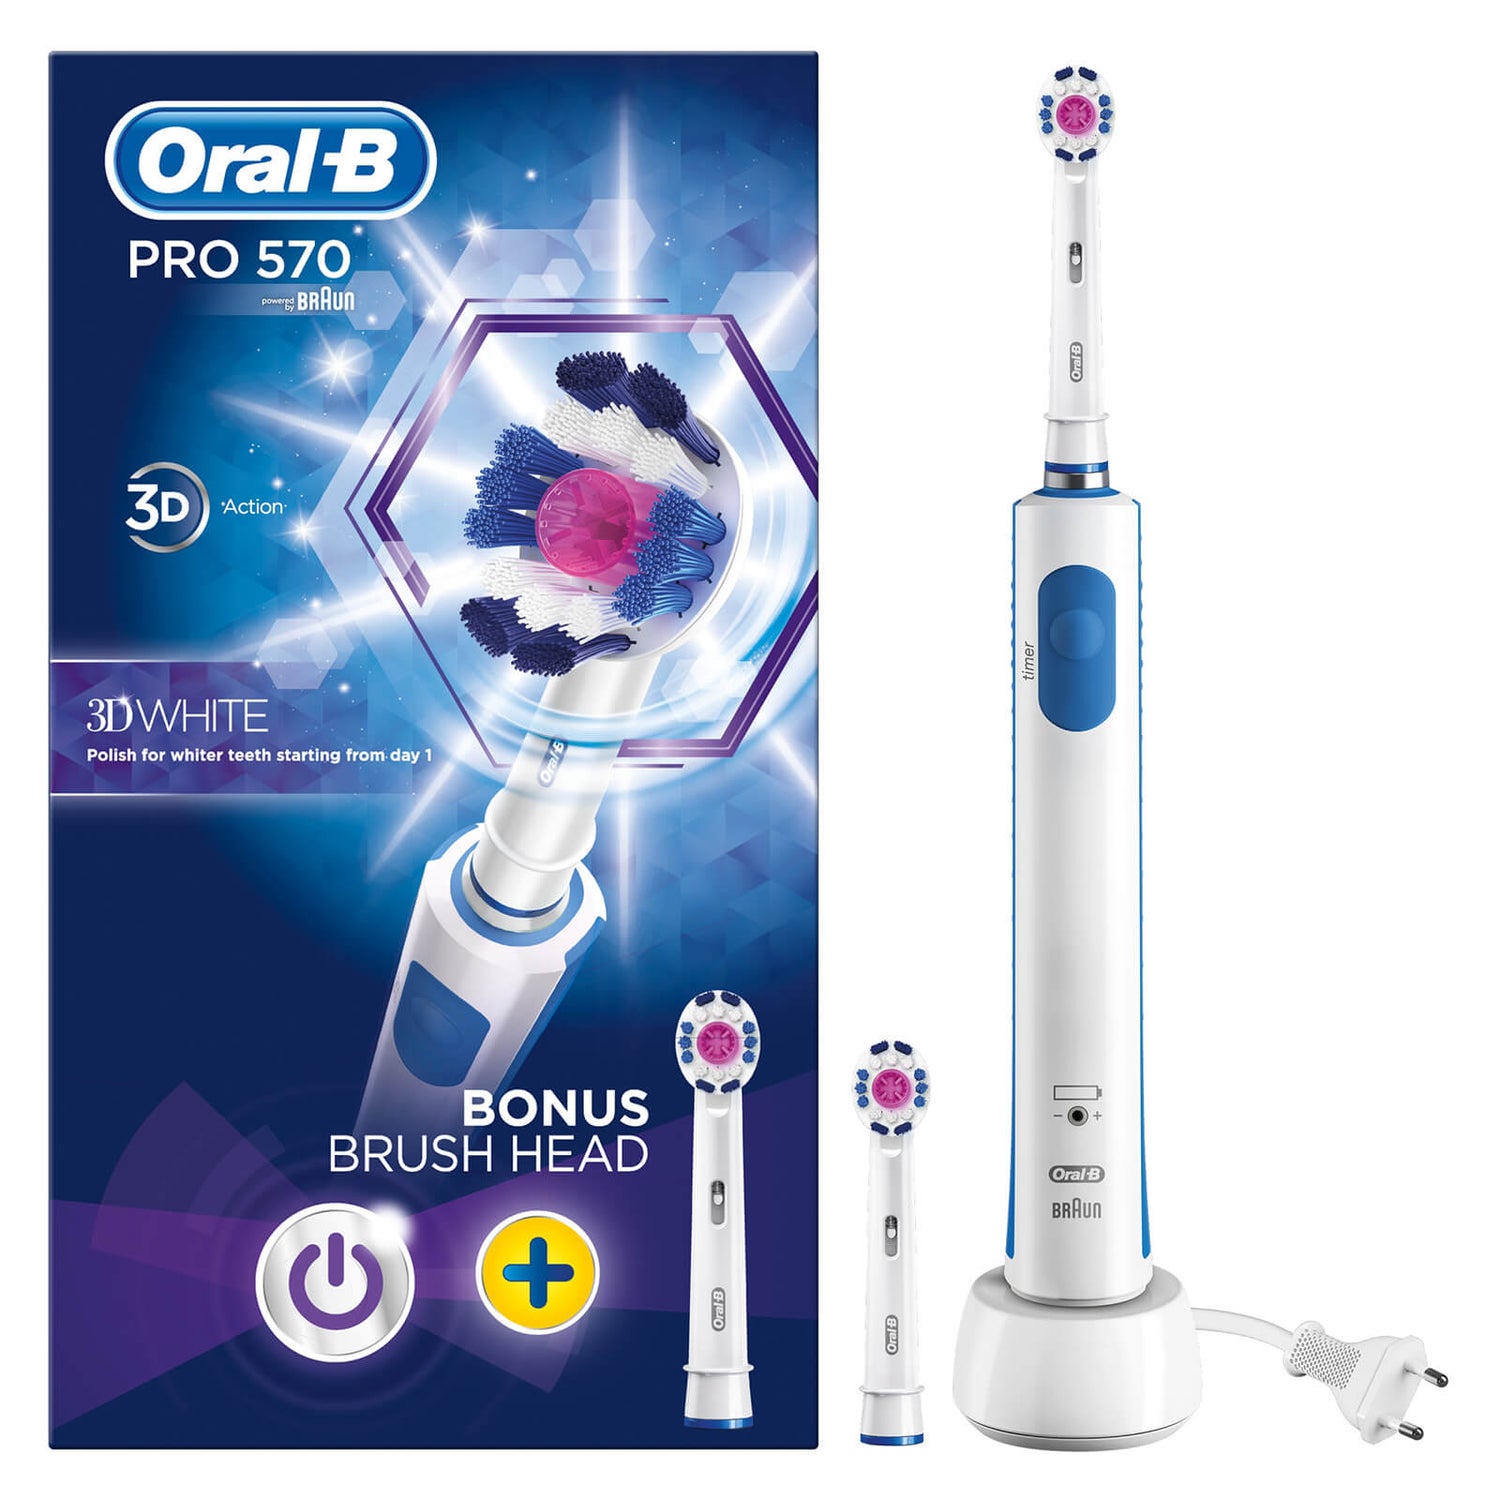 Oral B Pro 570 3D White Electric Toothbrush